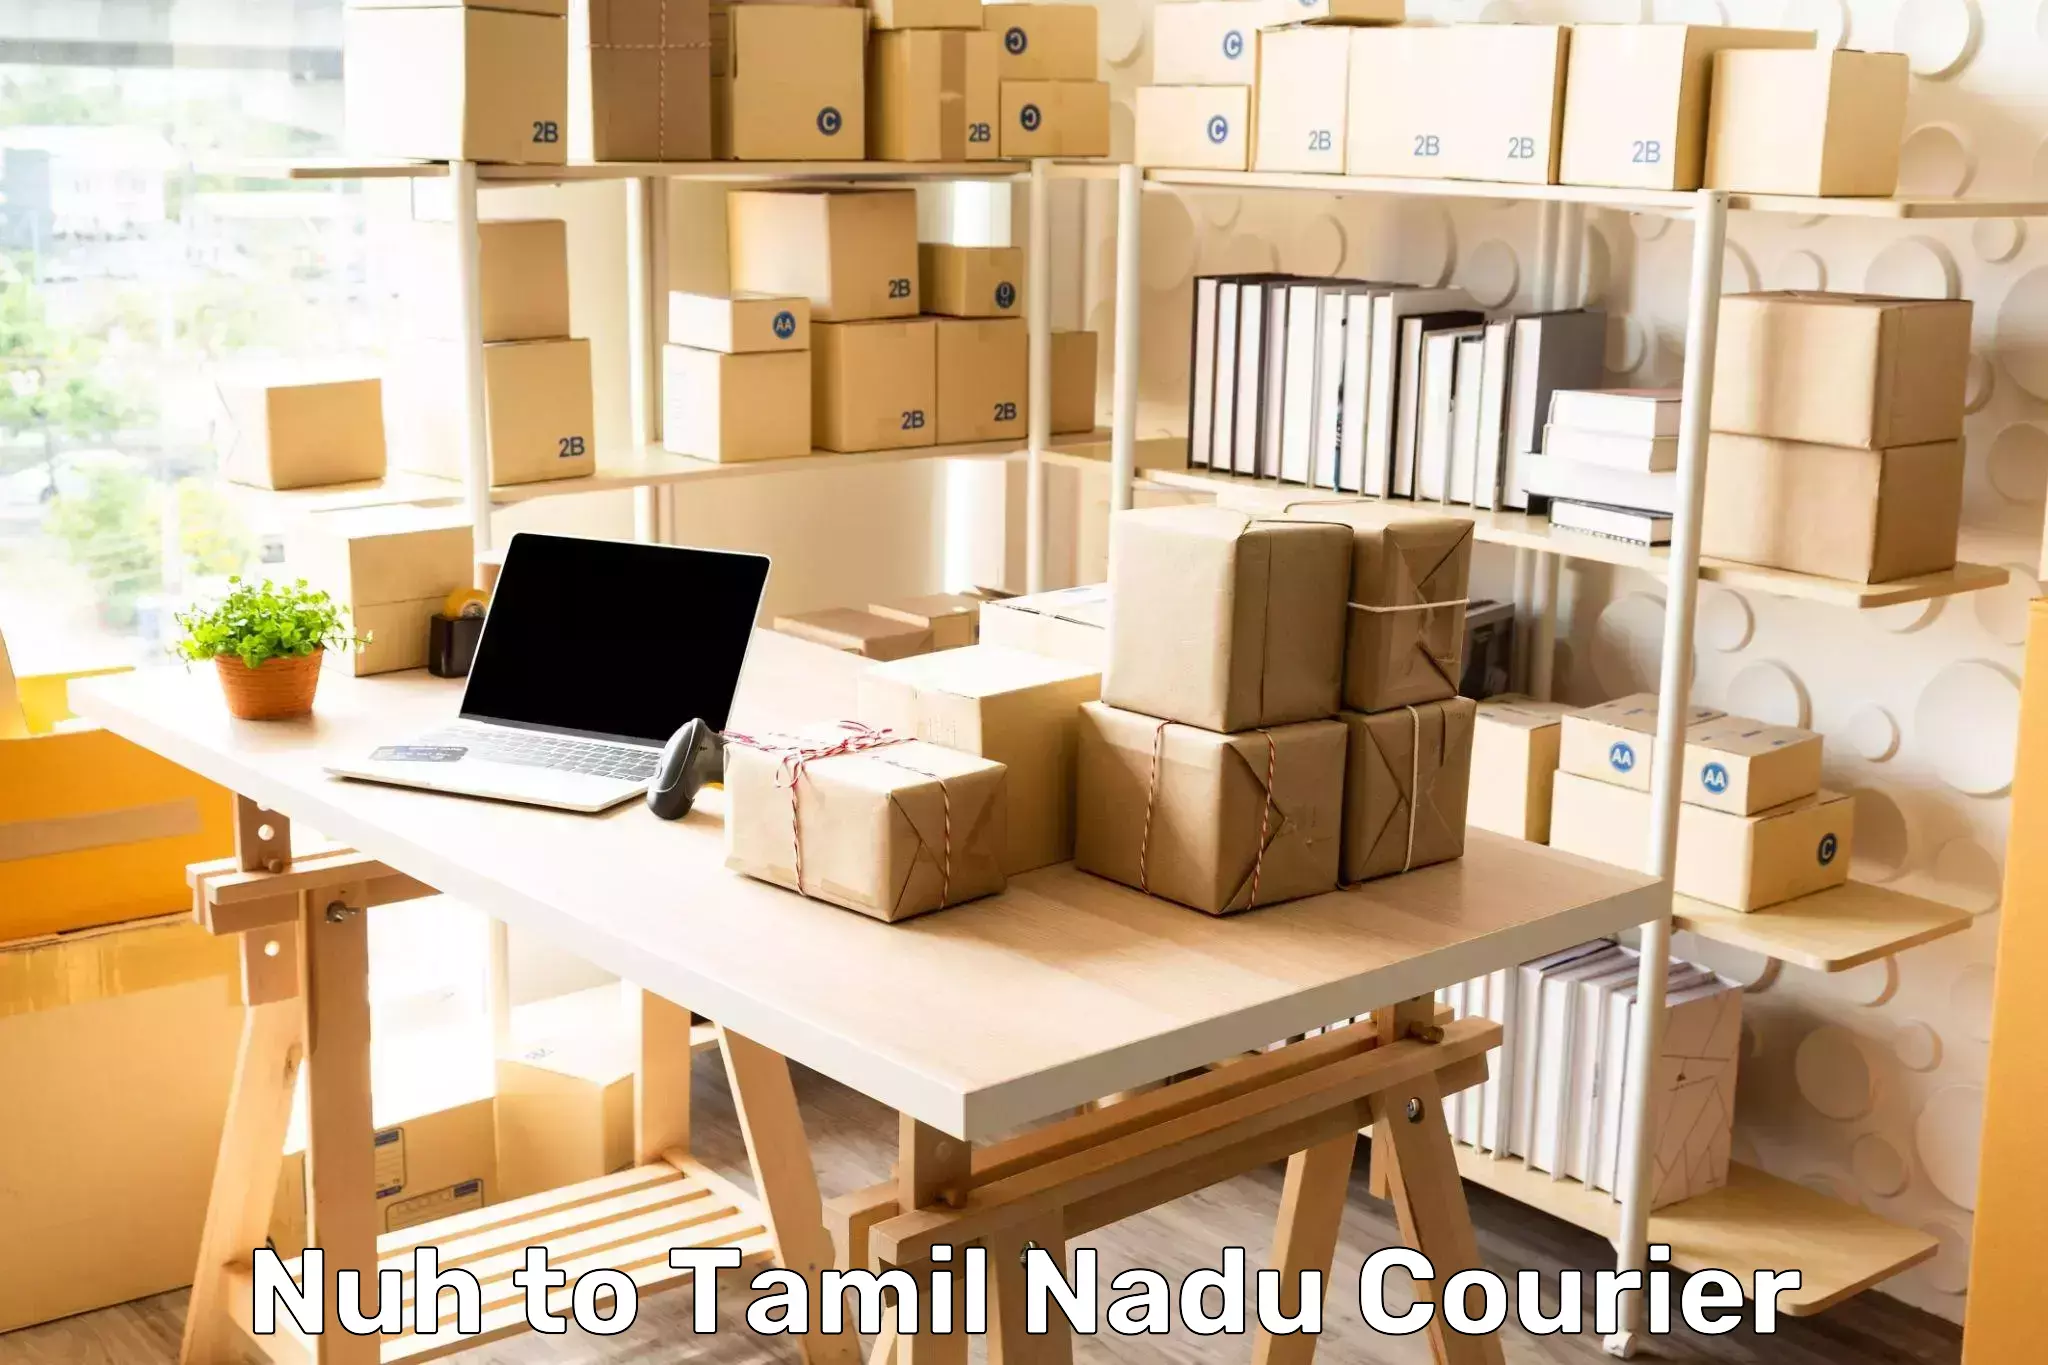 On-time delivery services Nuh to Tamil Nadu